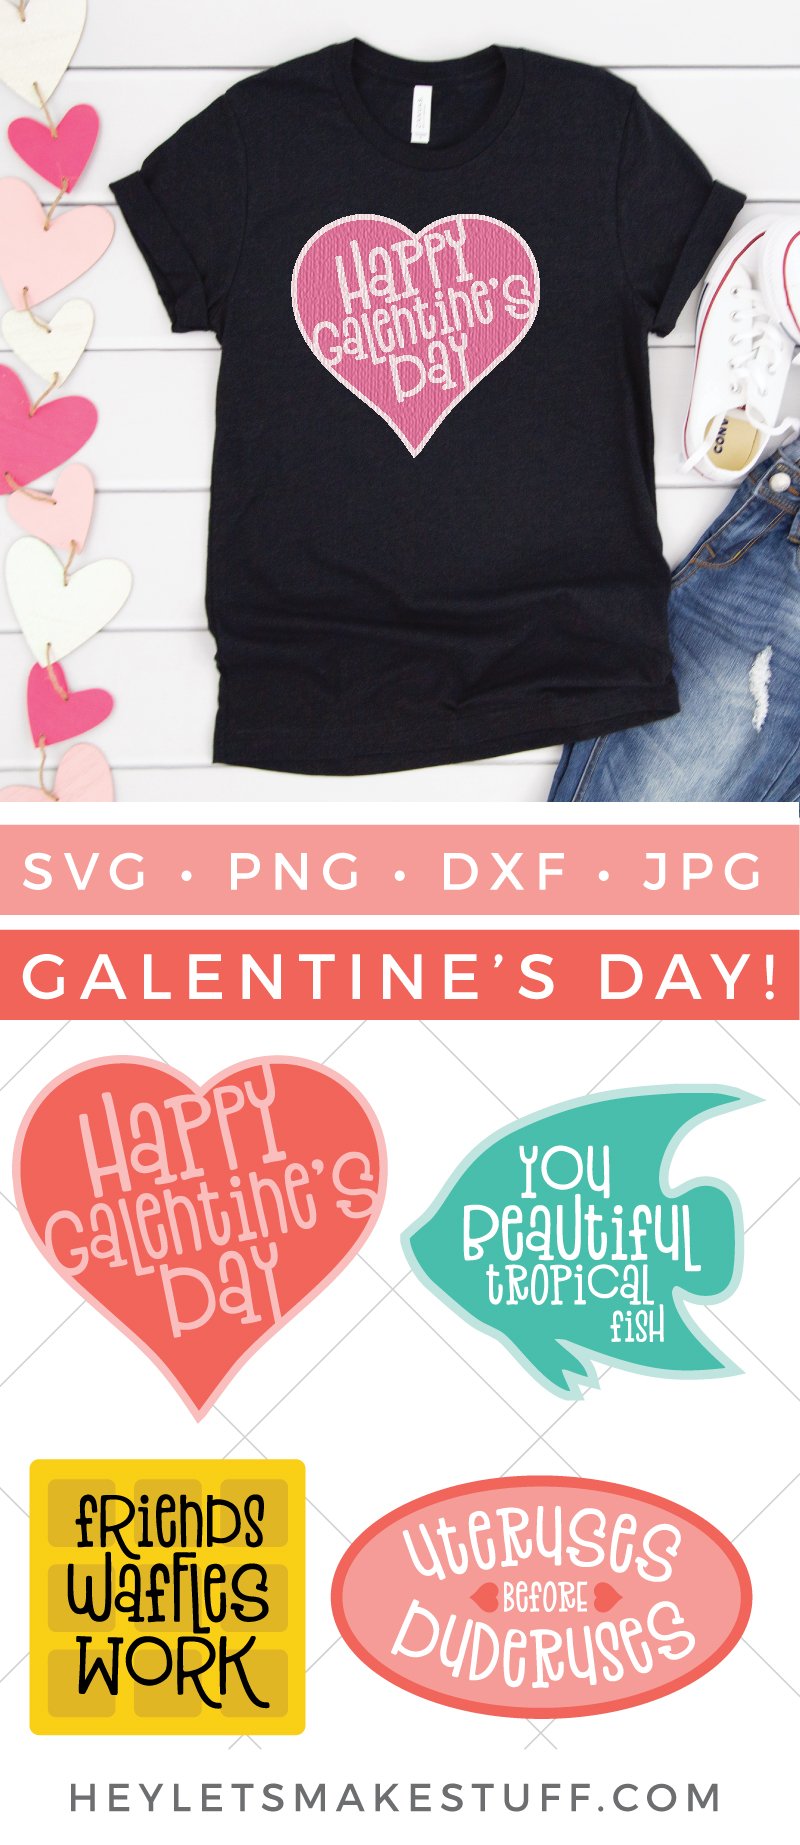 A banner of hearts and a pair of blue jeans and tennis shoes along with a black t-shirt with a pink heart design and the saying, \"Happy Galentine\'s Day\" with advertising for four cut files that say, \"You Beautiful Tropical Fish\", \"Happy Galentine\'s Day\", \"Friends Waffles Work\" and \"Uteruses Before Duderuses\" from HEYLETSMAKESTUFF.COM